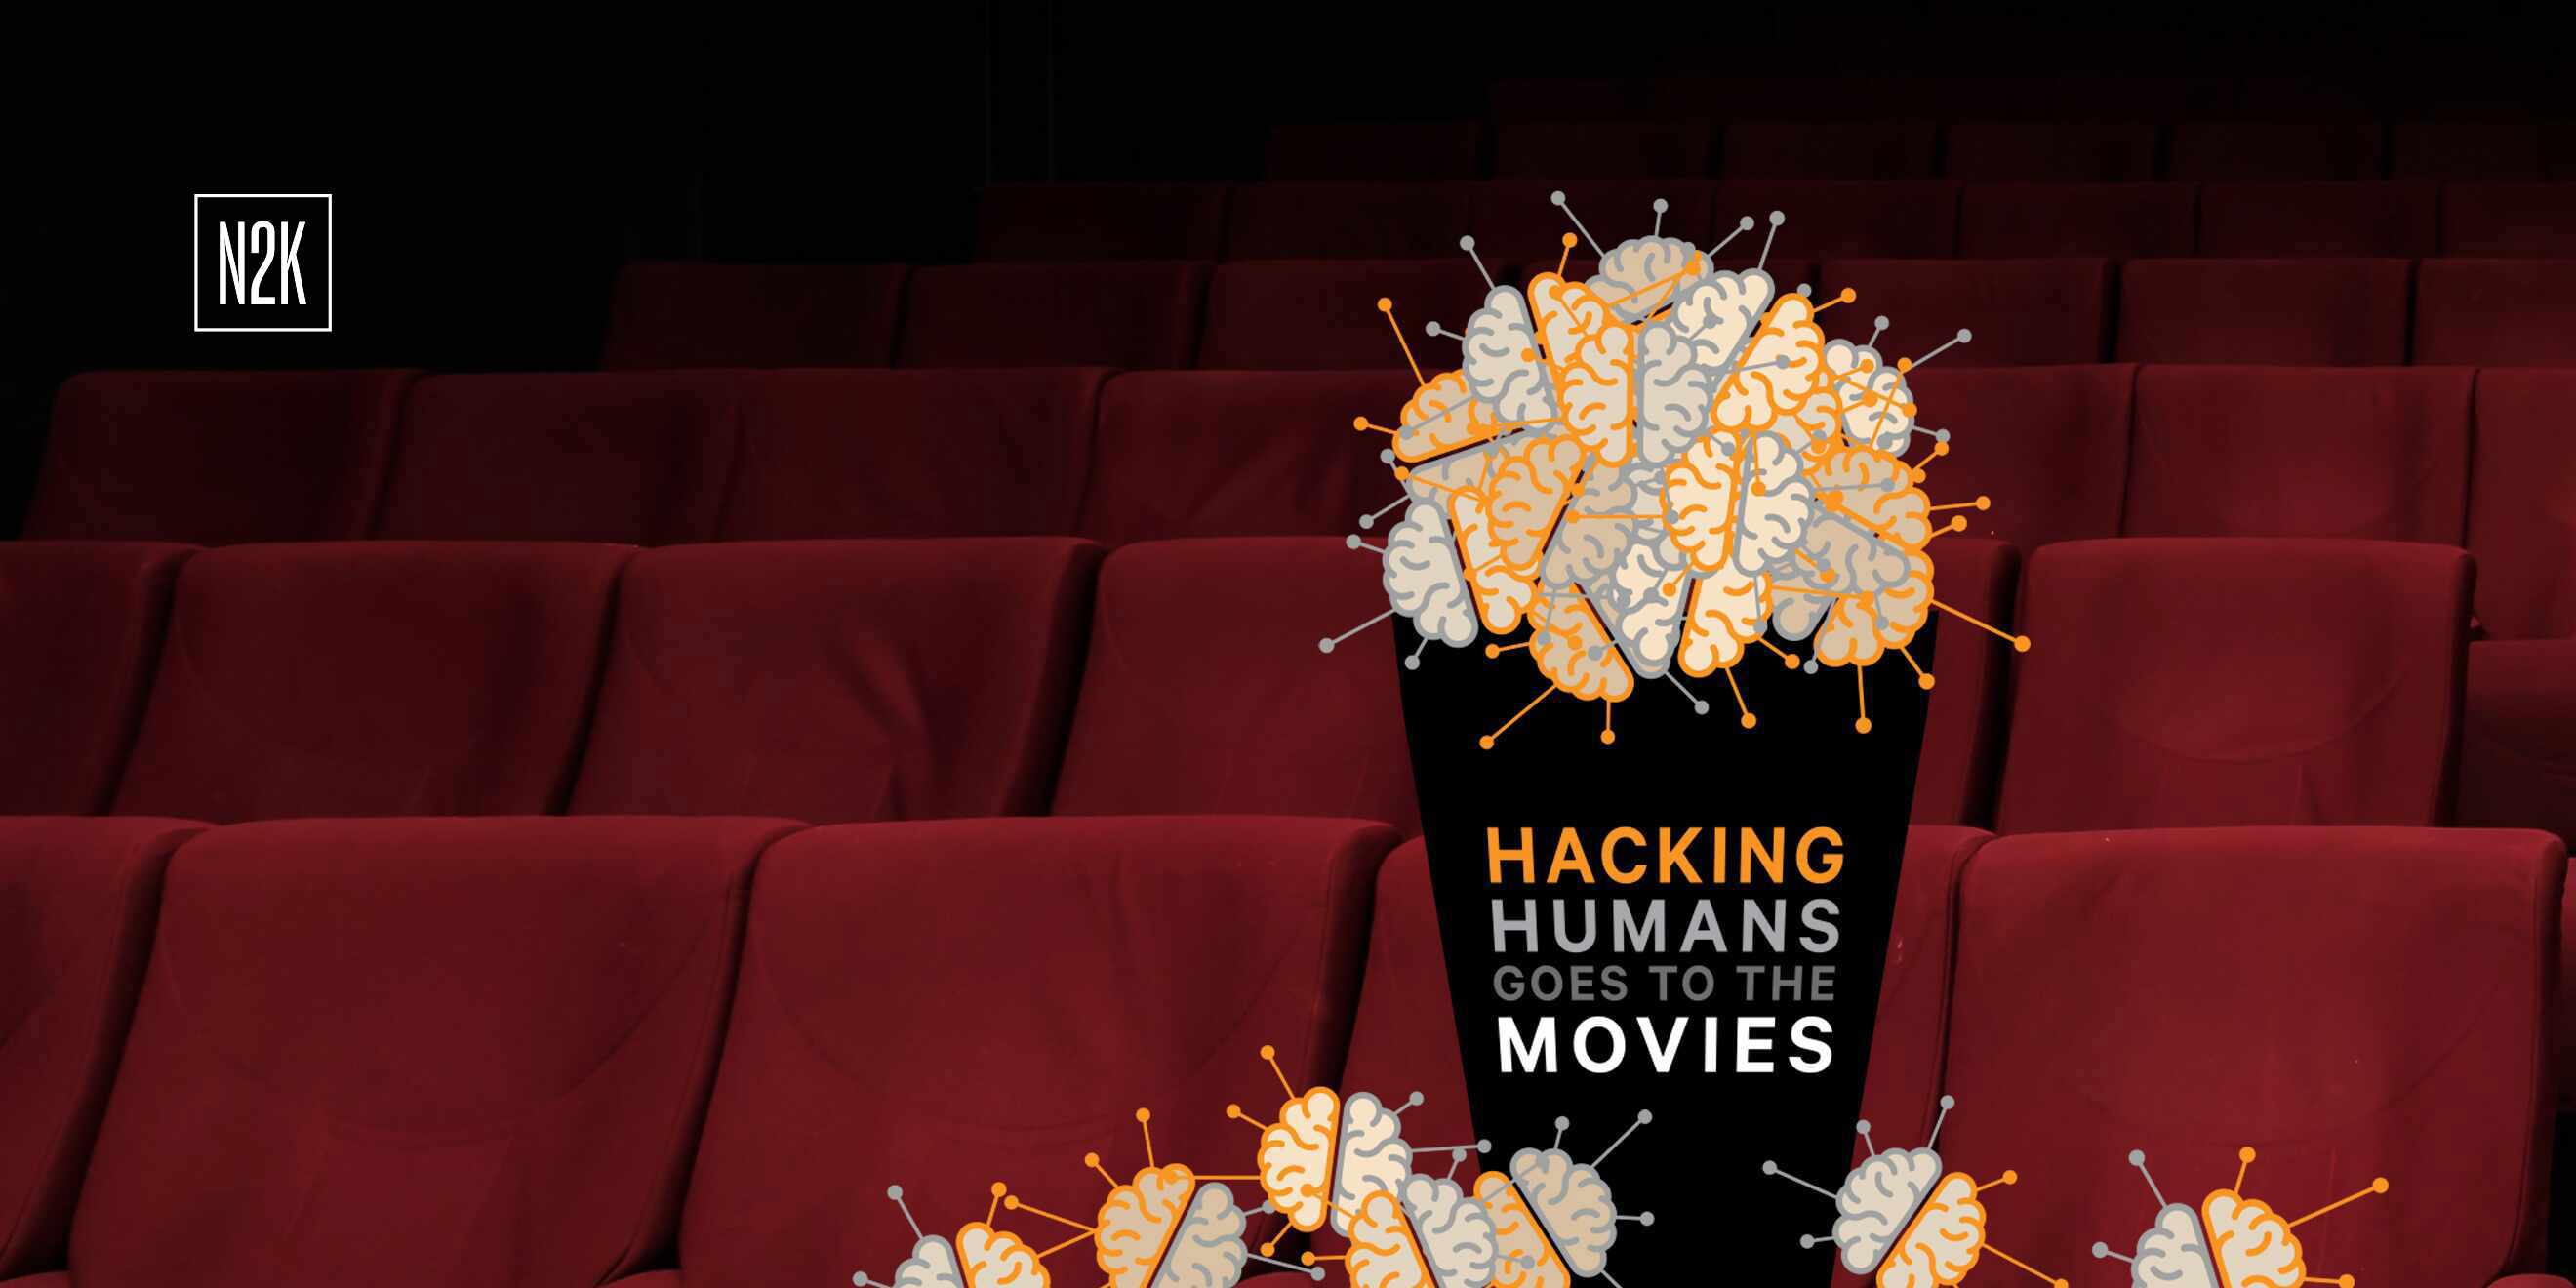 Hacking Humans Goes to the Movies 12.22.21